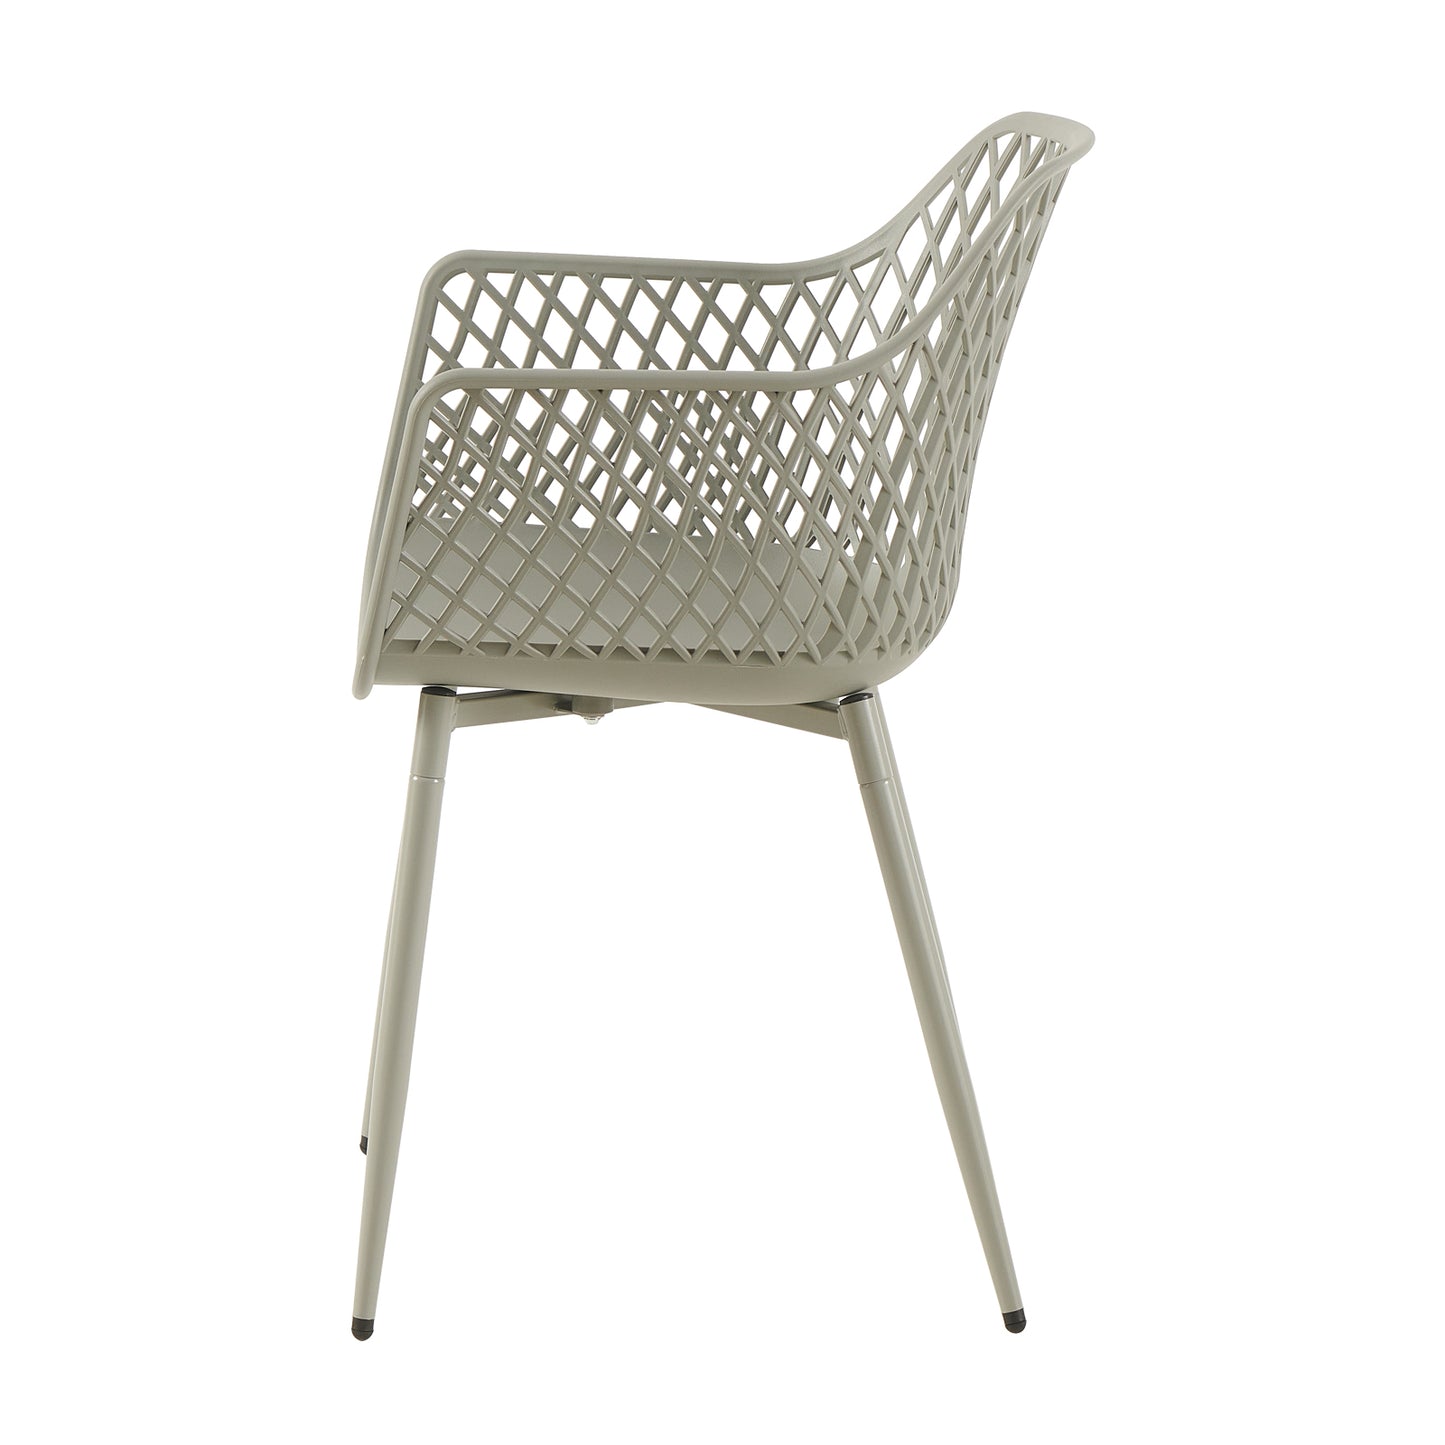 ROME Hollow Chair with Iron Legs - Gray